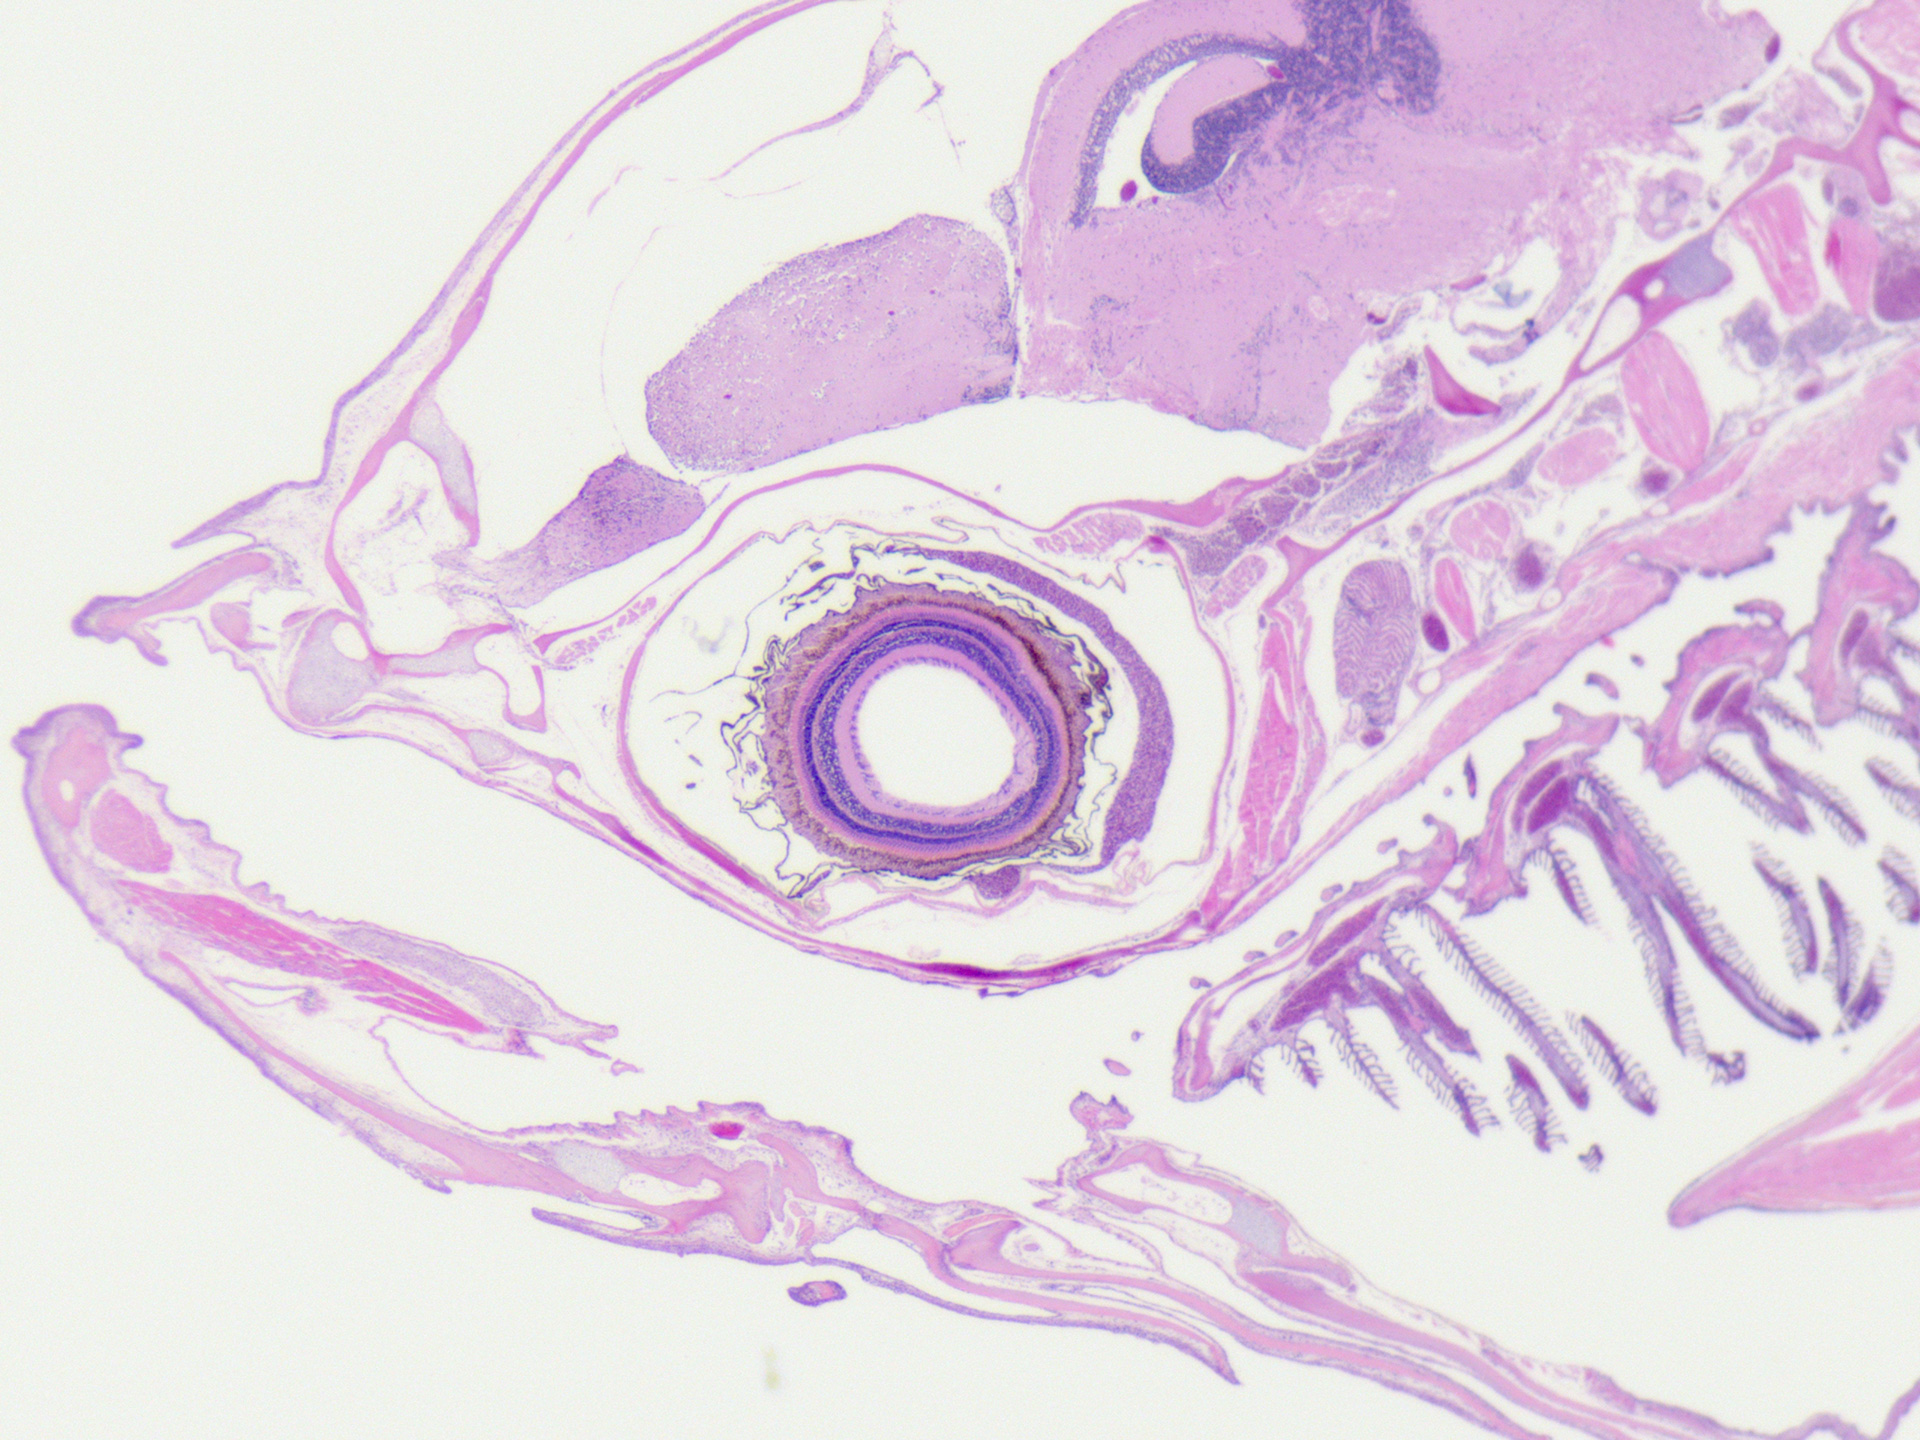 Fish, HE staining, brightfield, acquired with ZEISS Stemi 305 